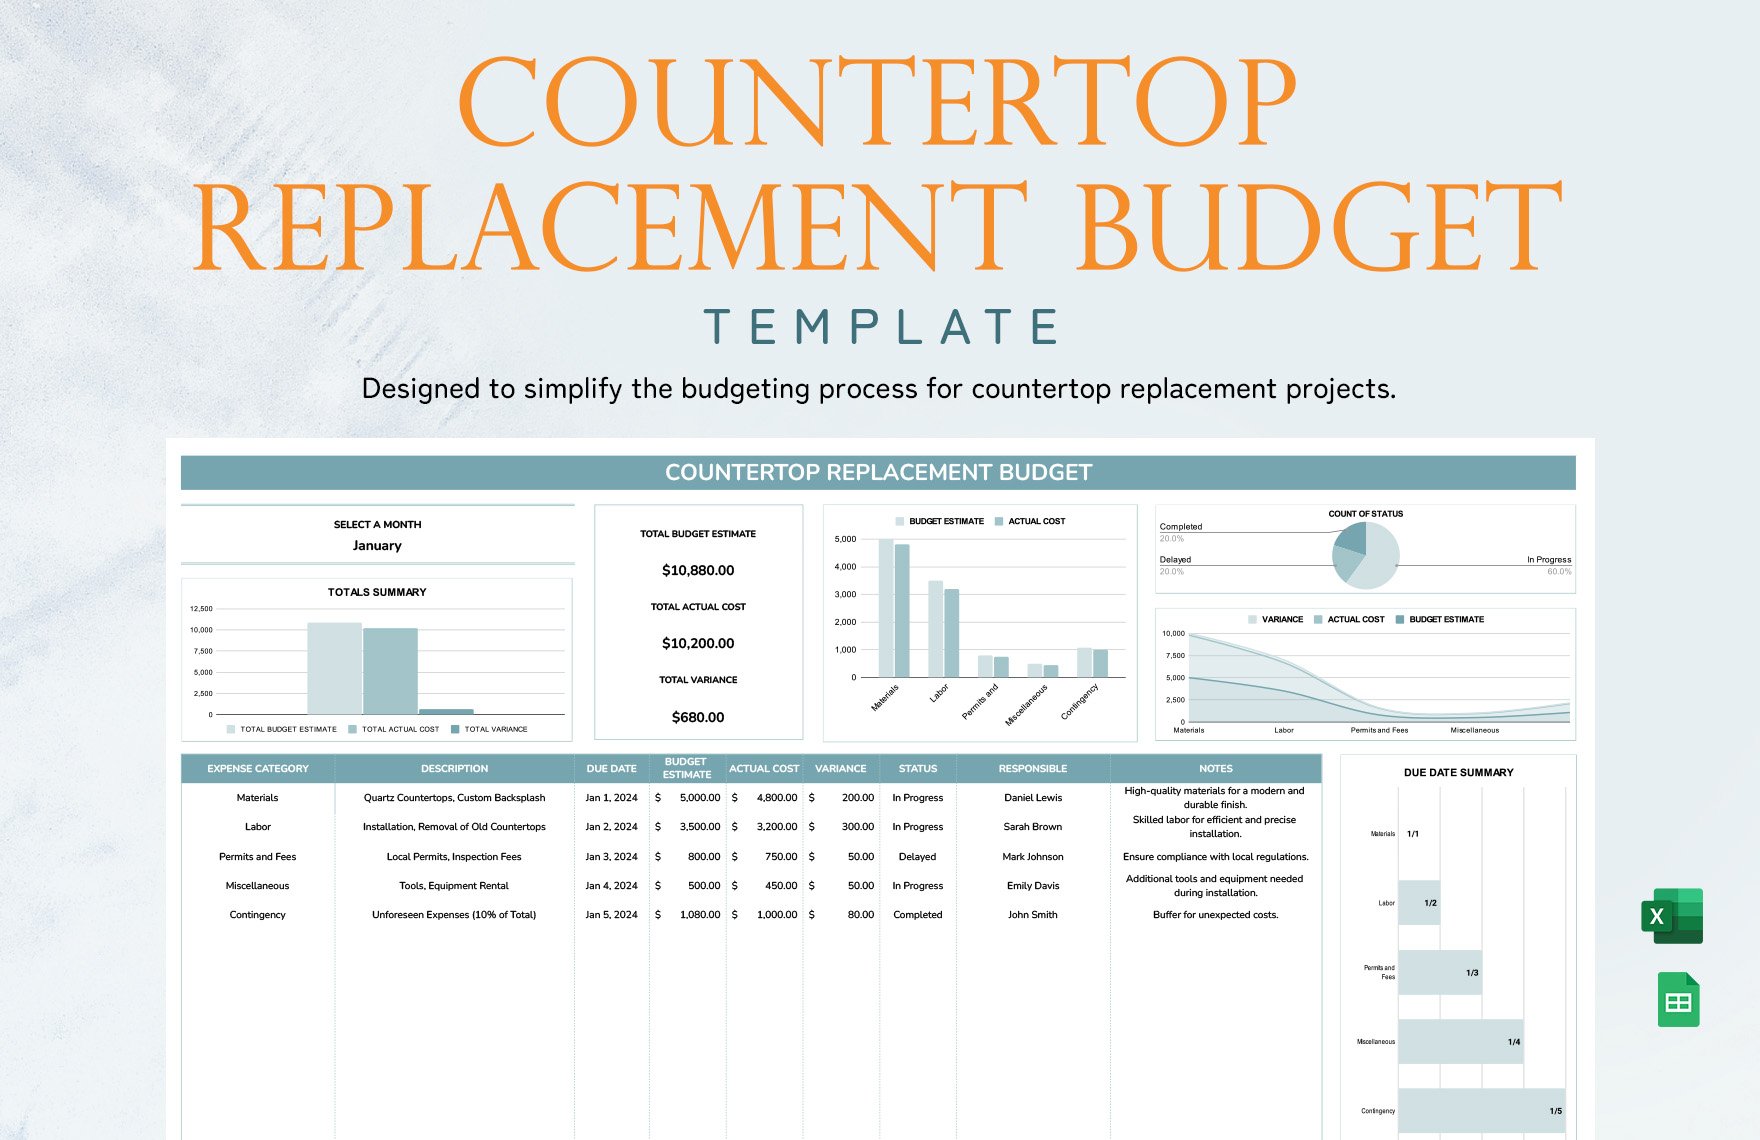 Countertop Replacement Budget Template